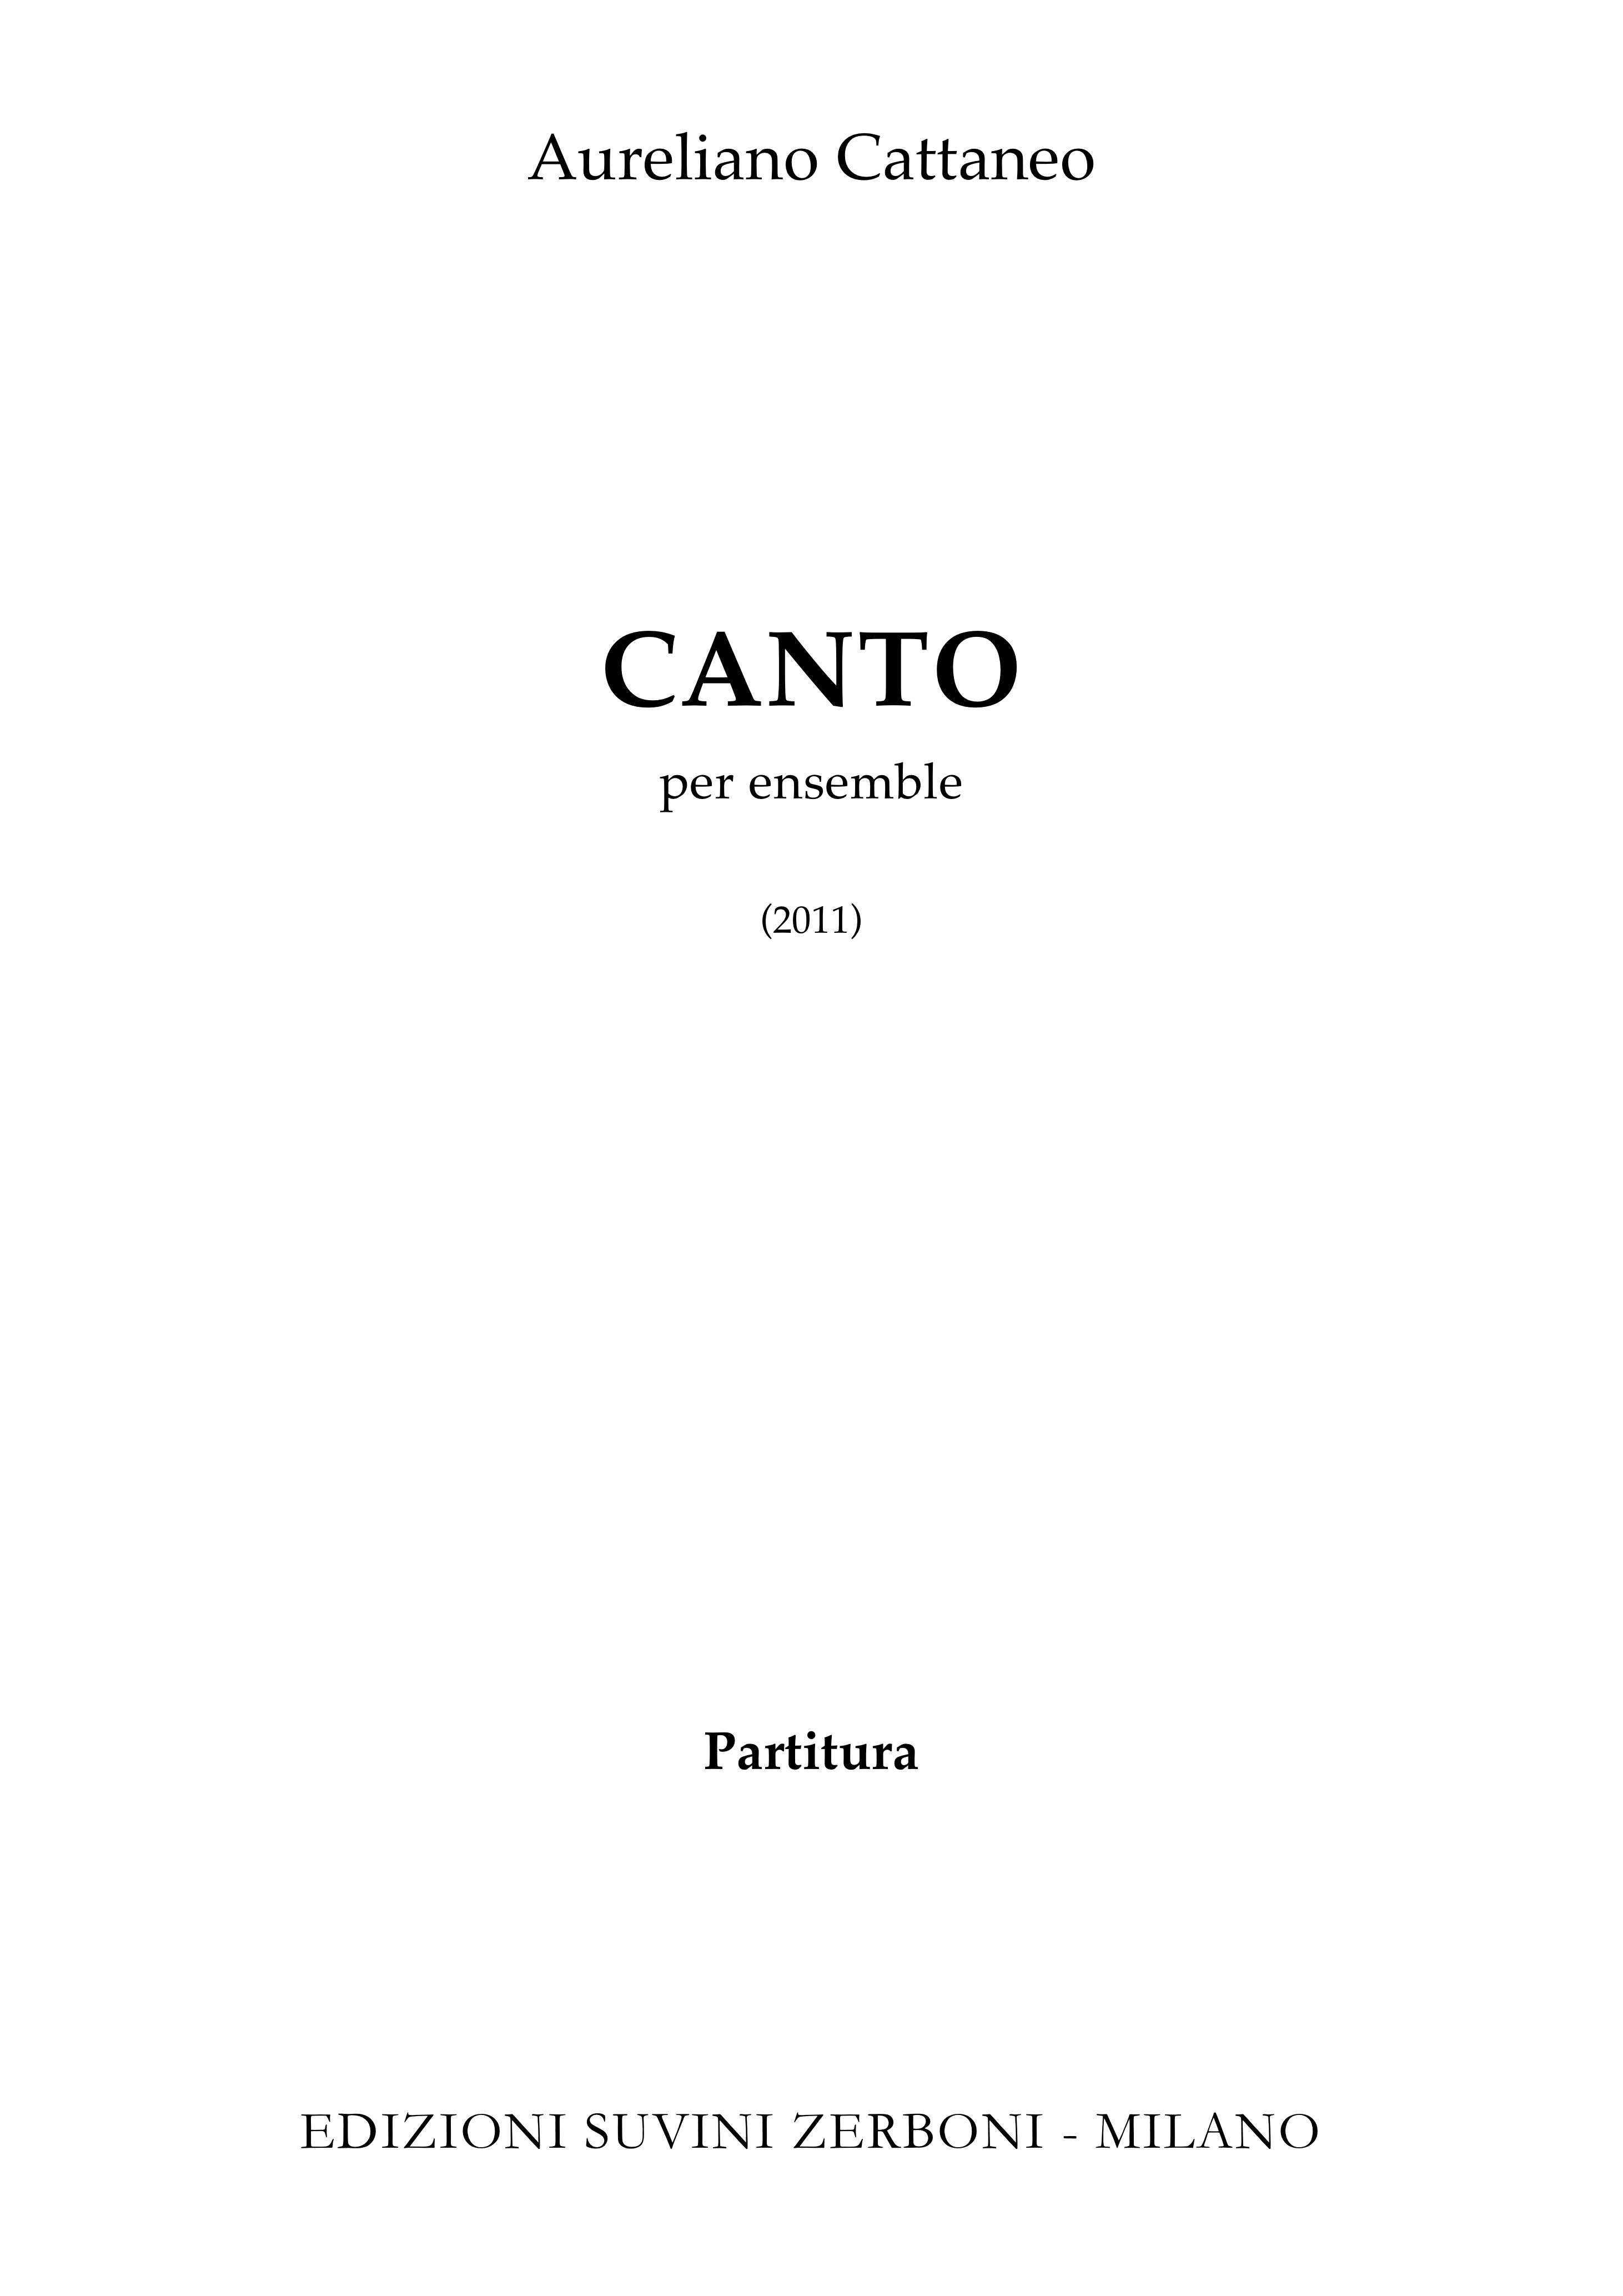 CANTO_Cattaneo 1